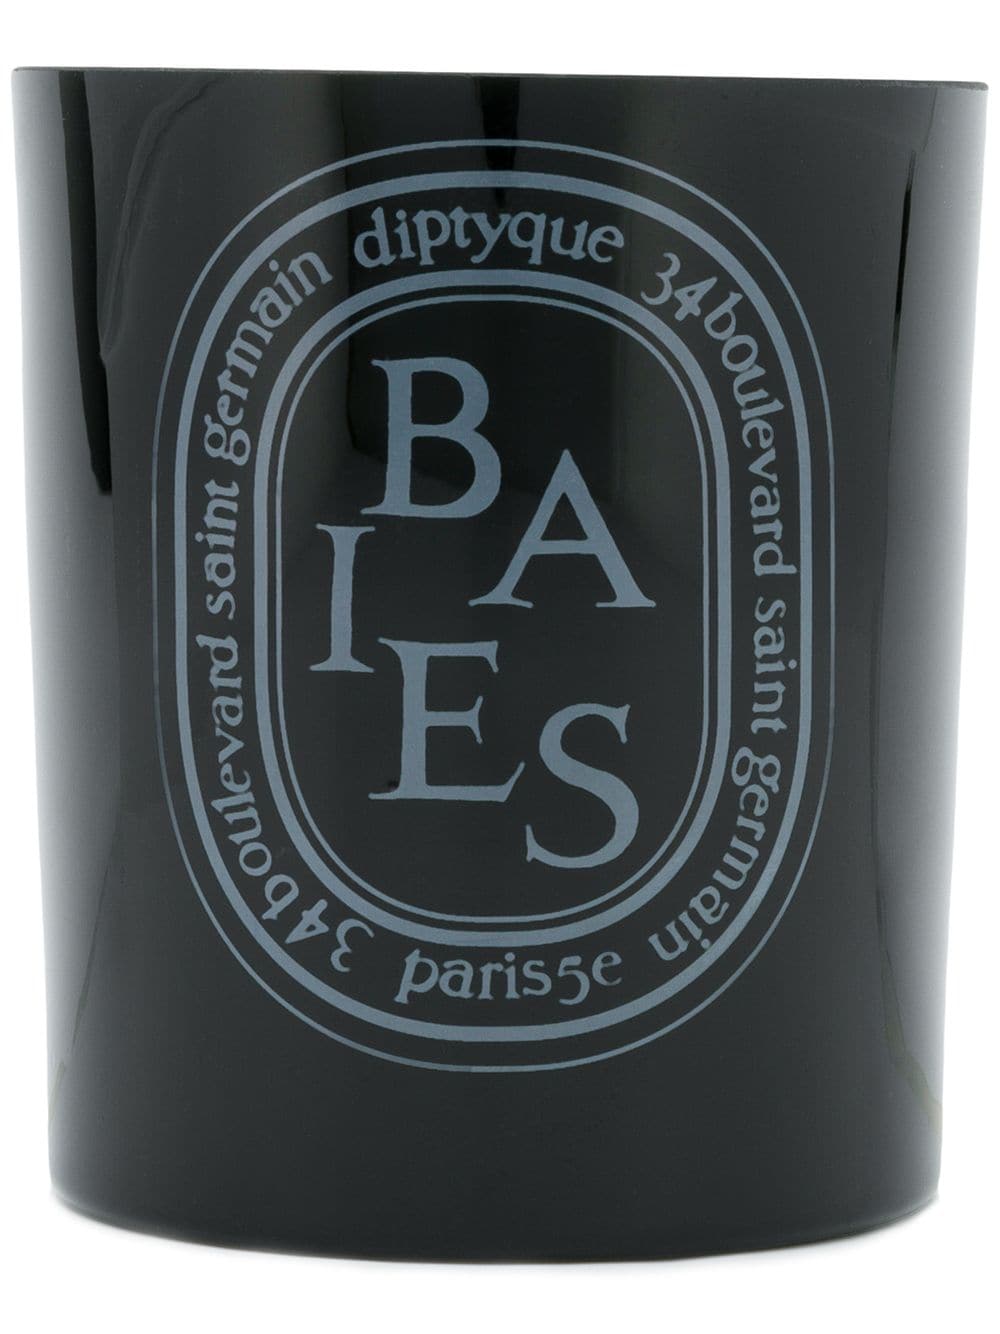 Diptyque Baies Candle In Black